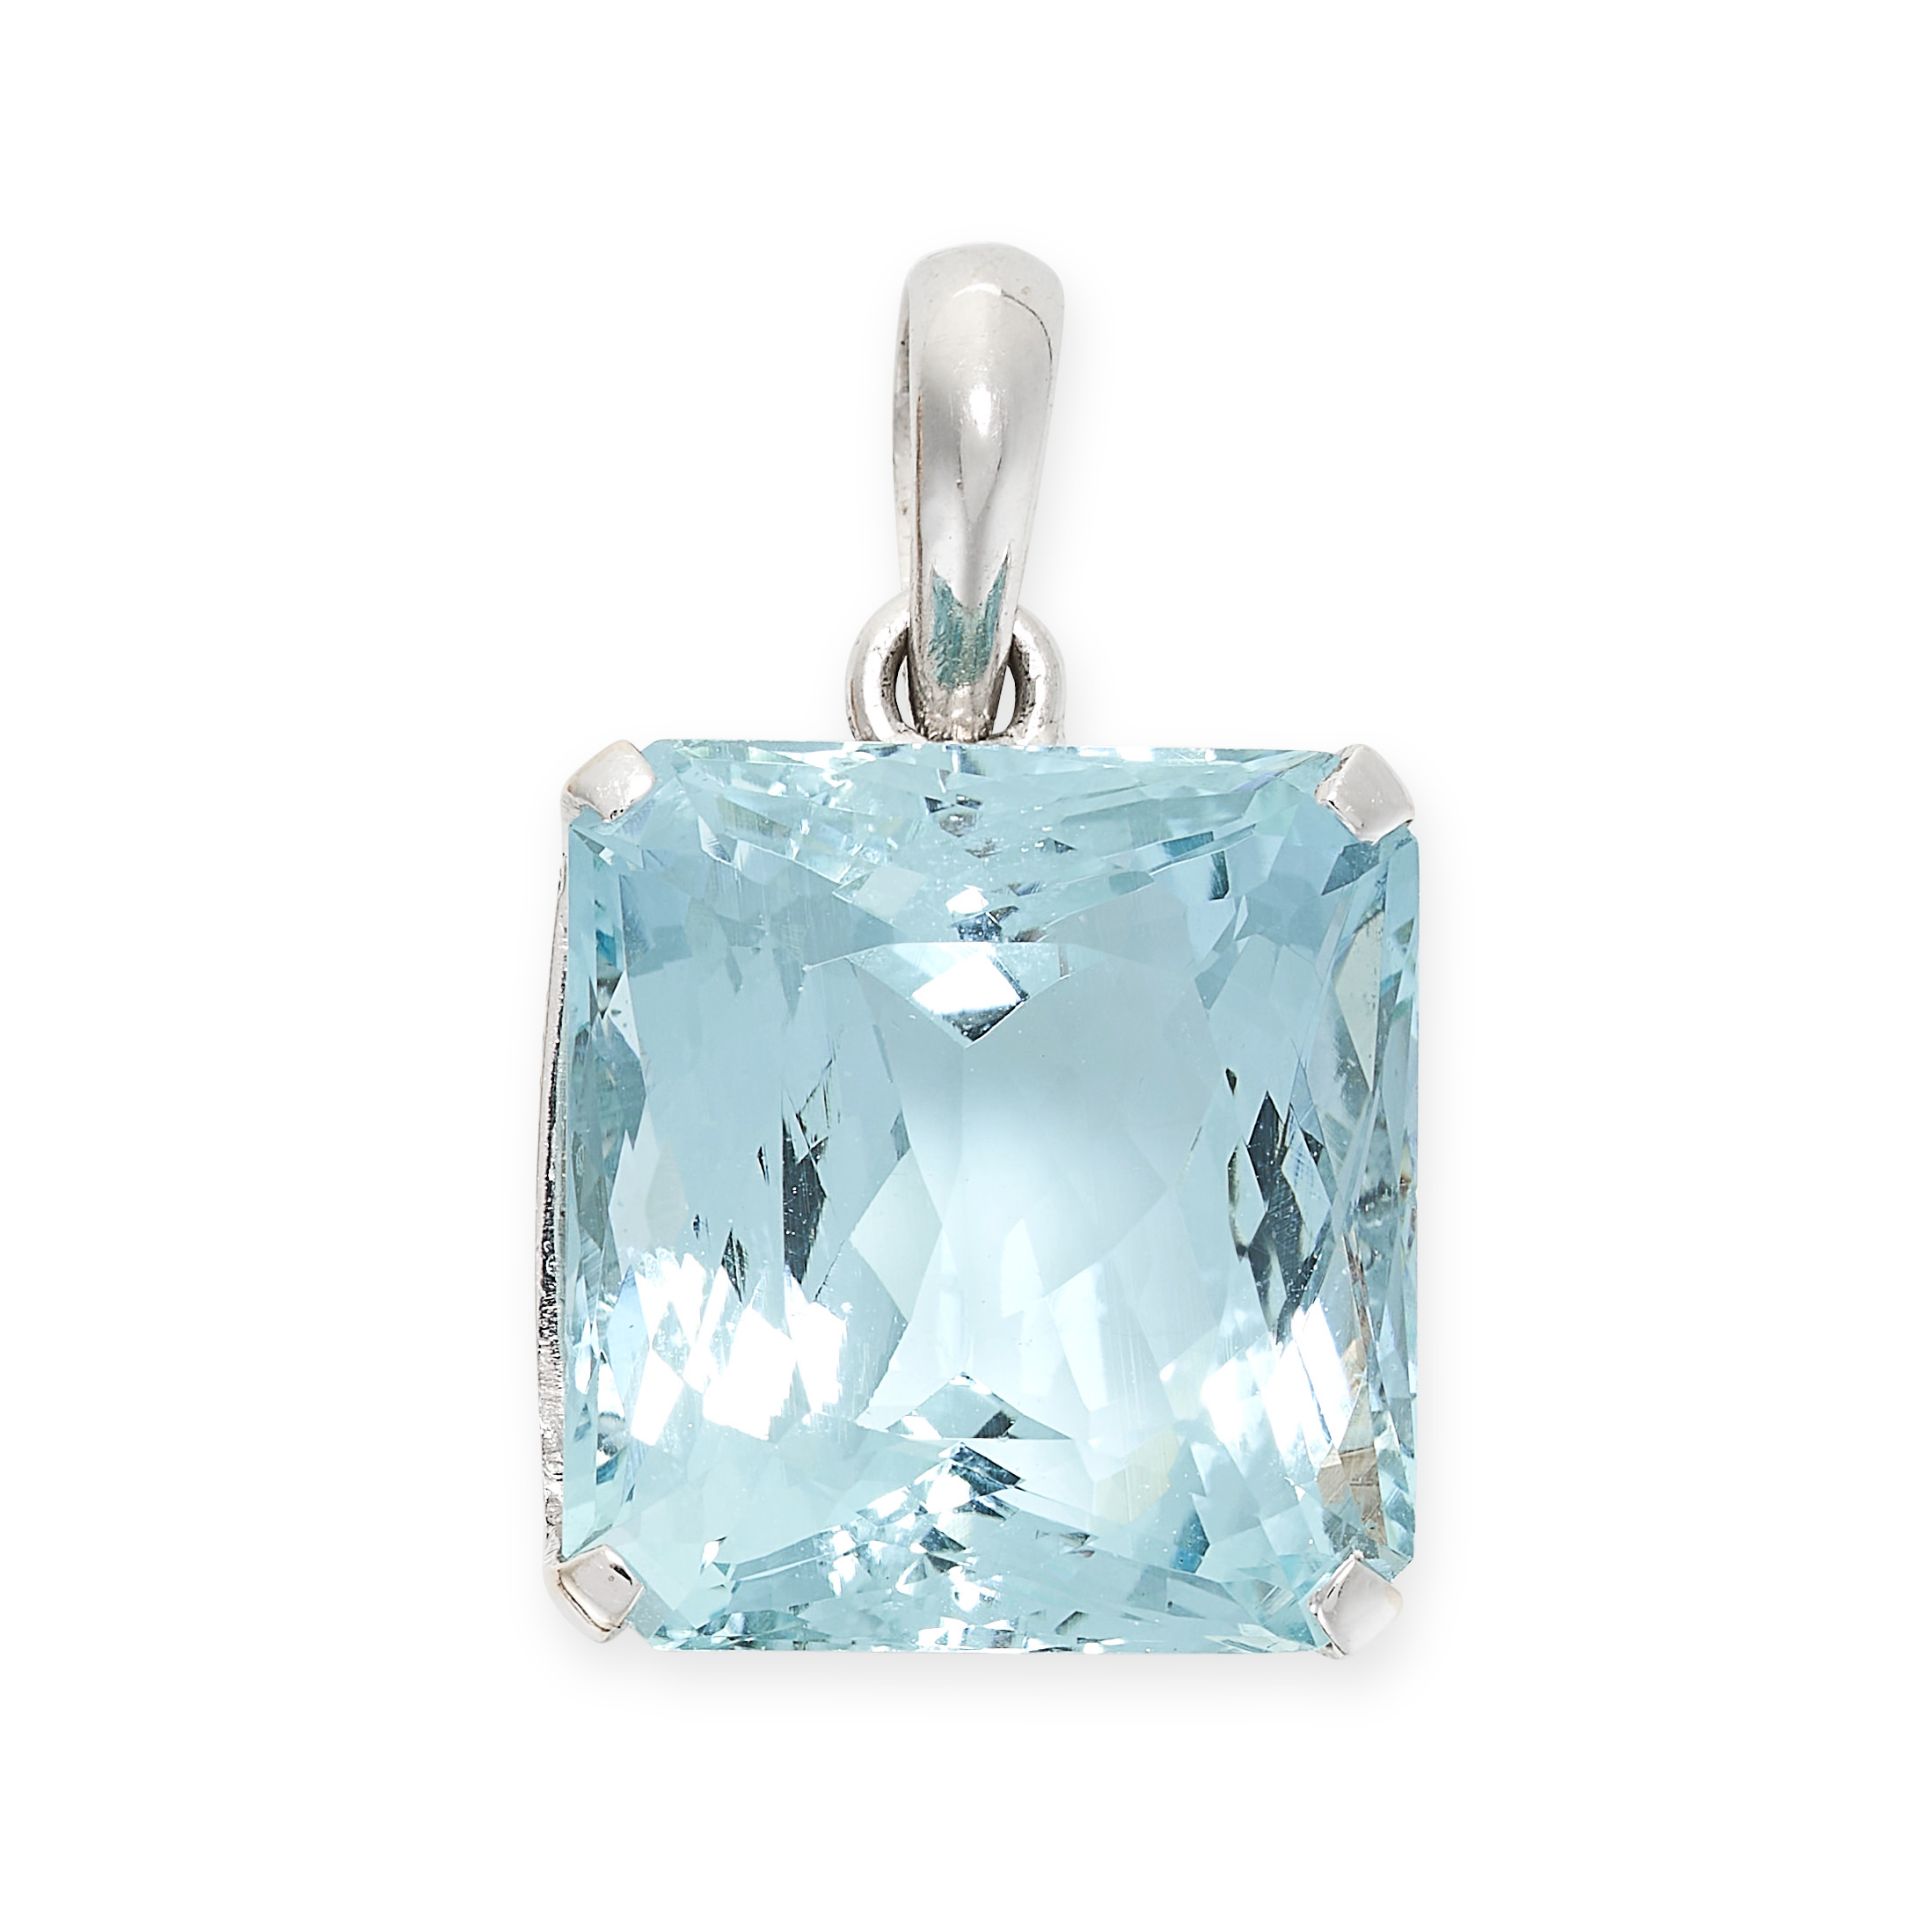 AN AQUAMARINE AND DIAMOND PENDANT set with an octagonal cut aquamarine of 22.00 carats accented by